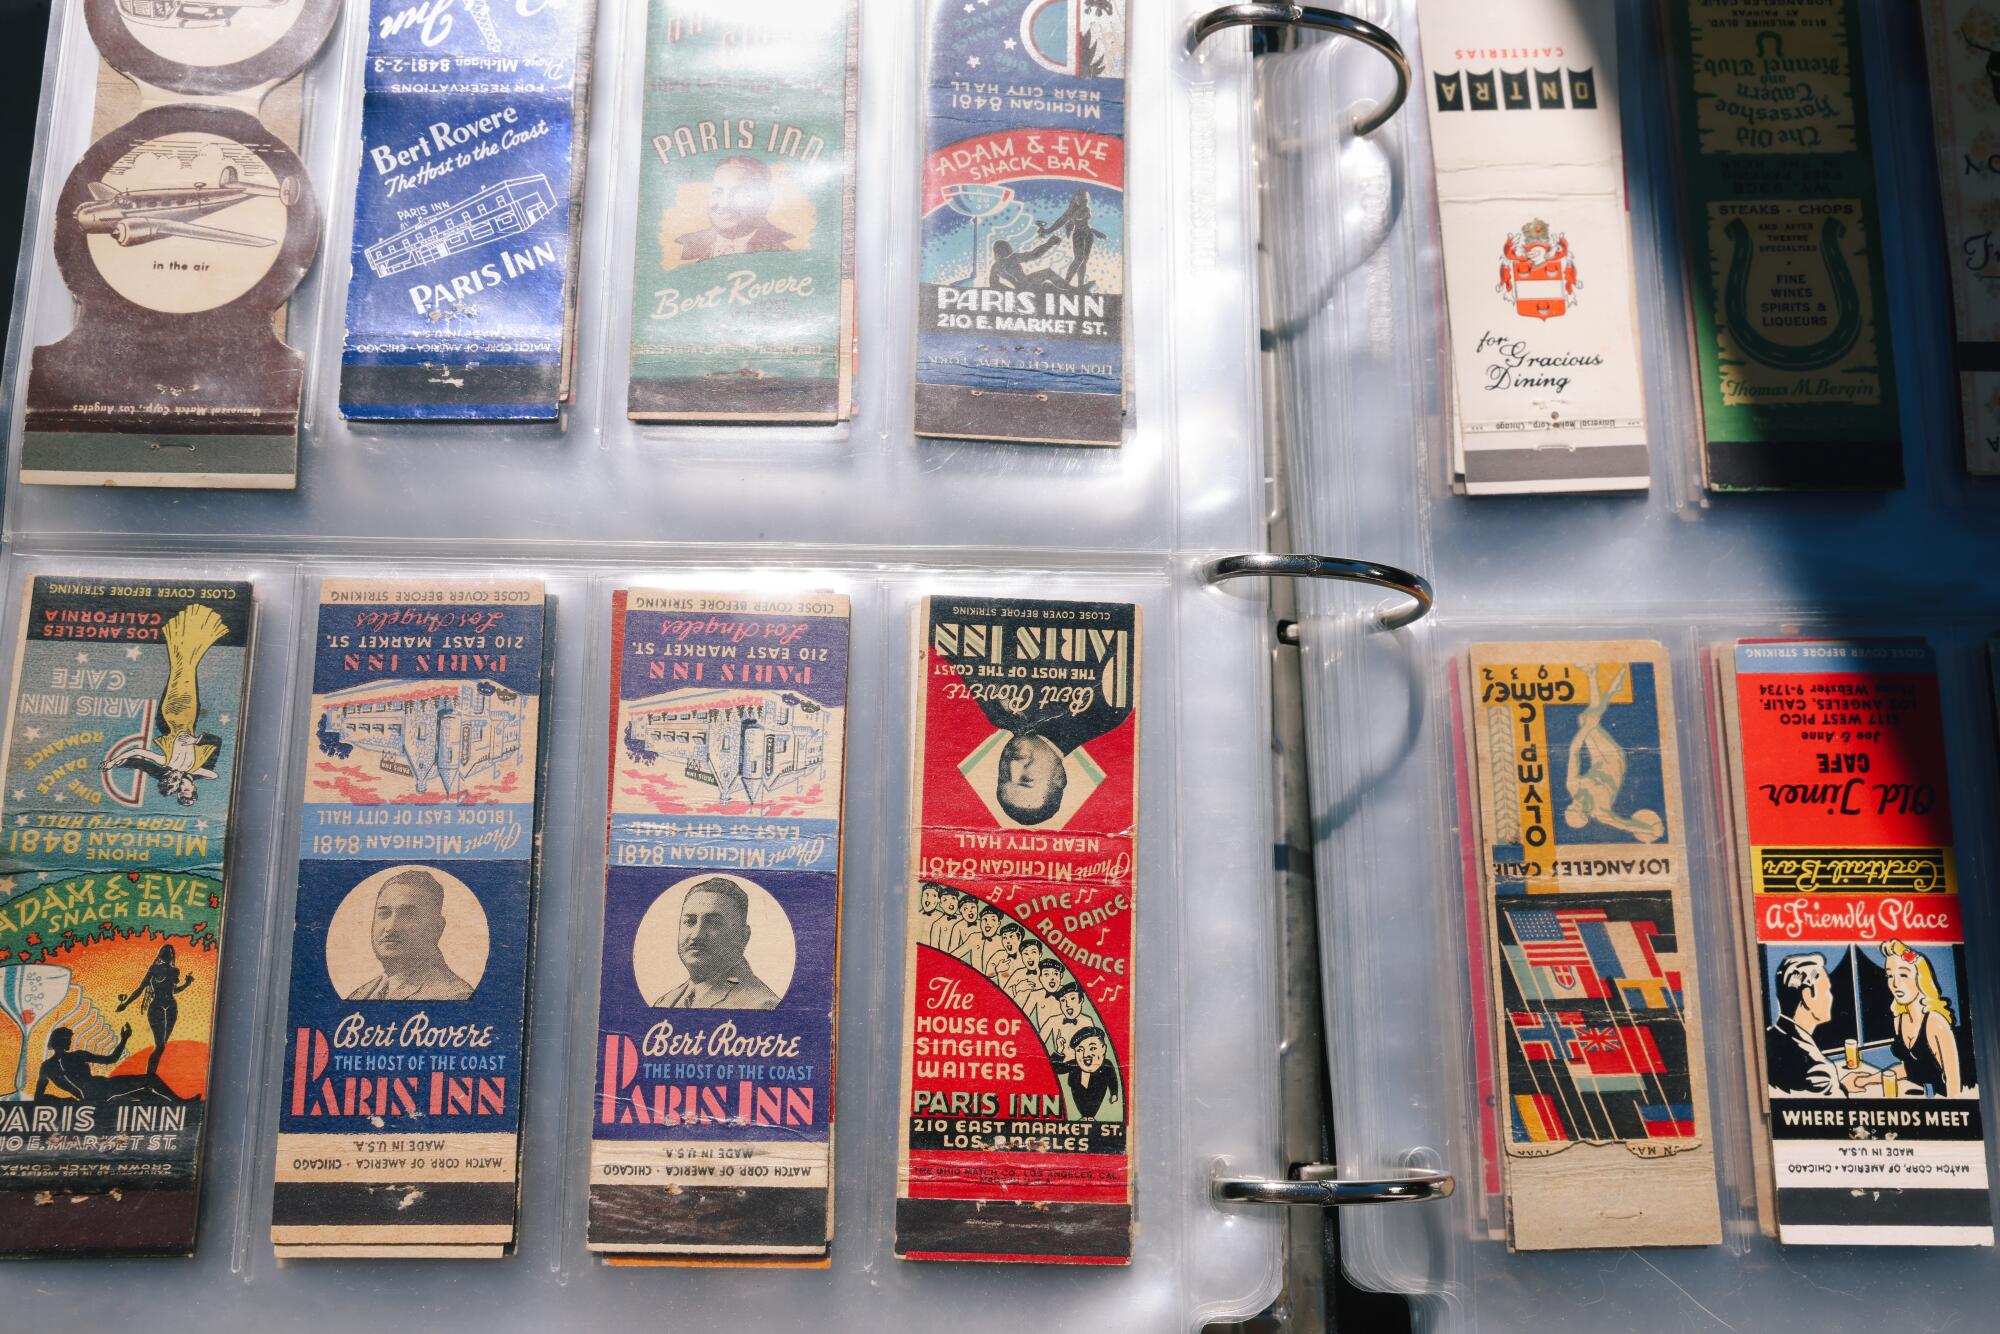 Denise McKinney's matchbook cover collection.